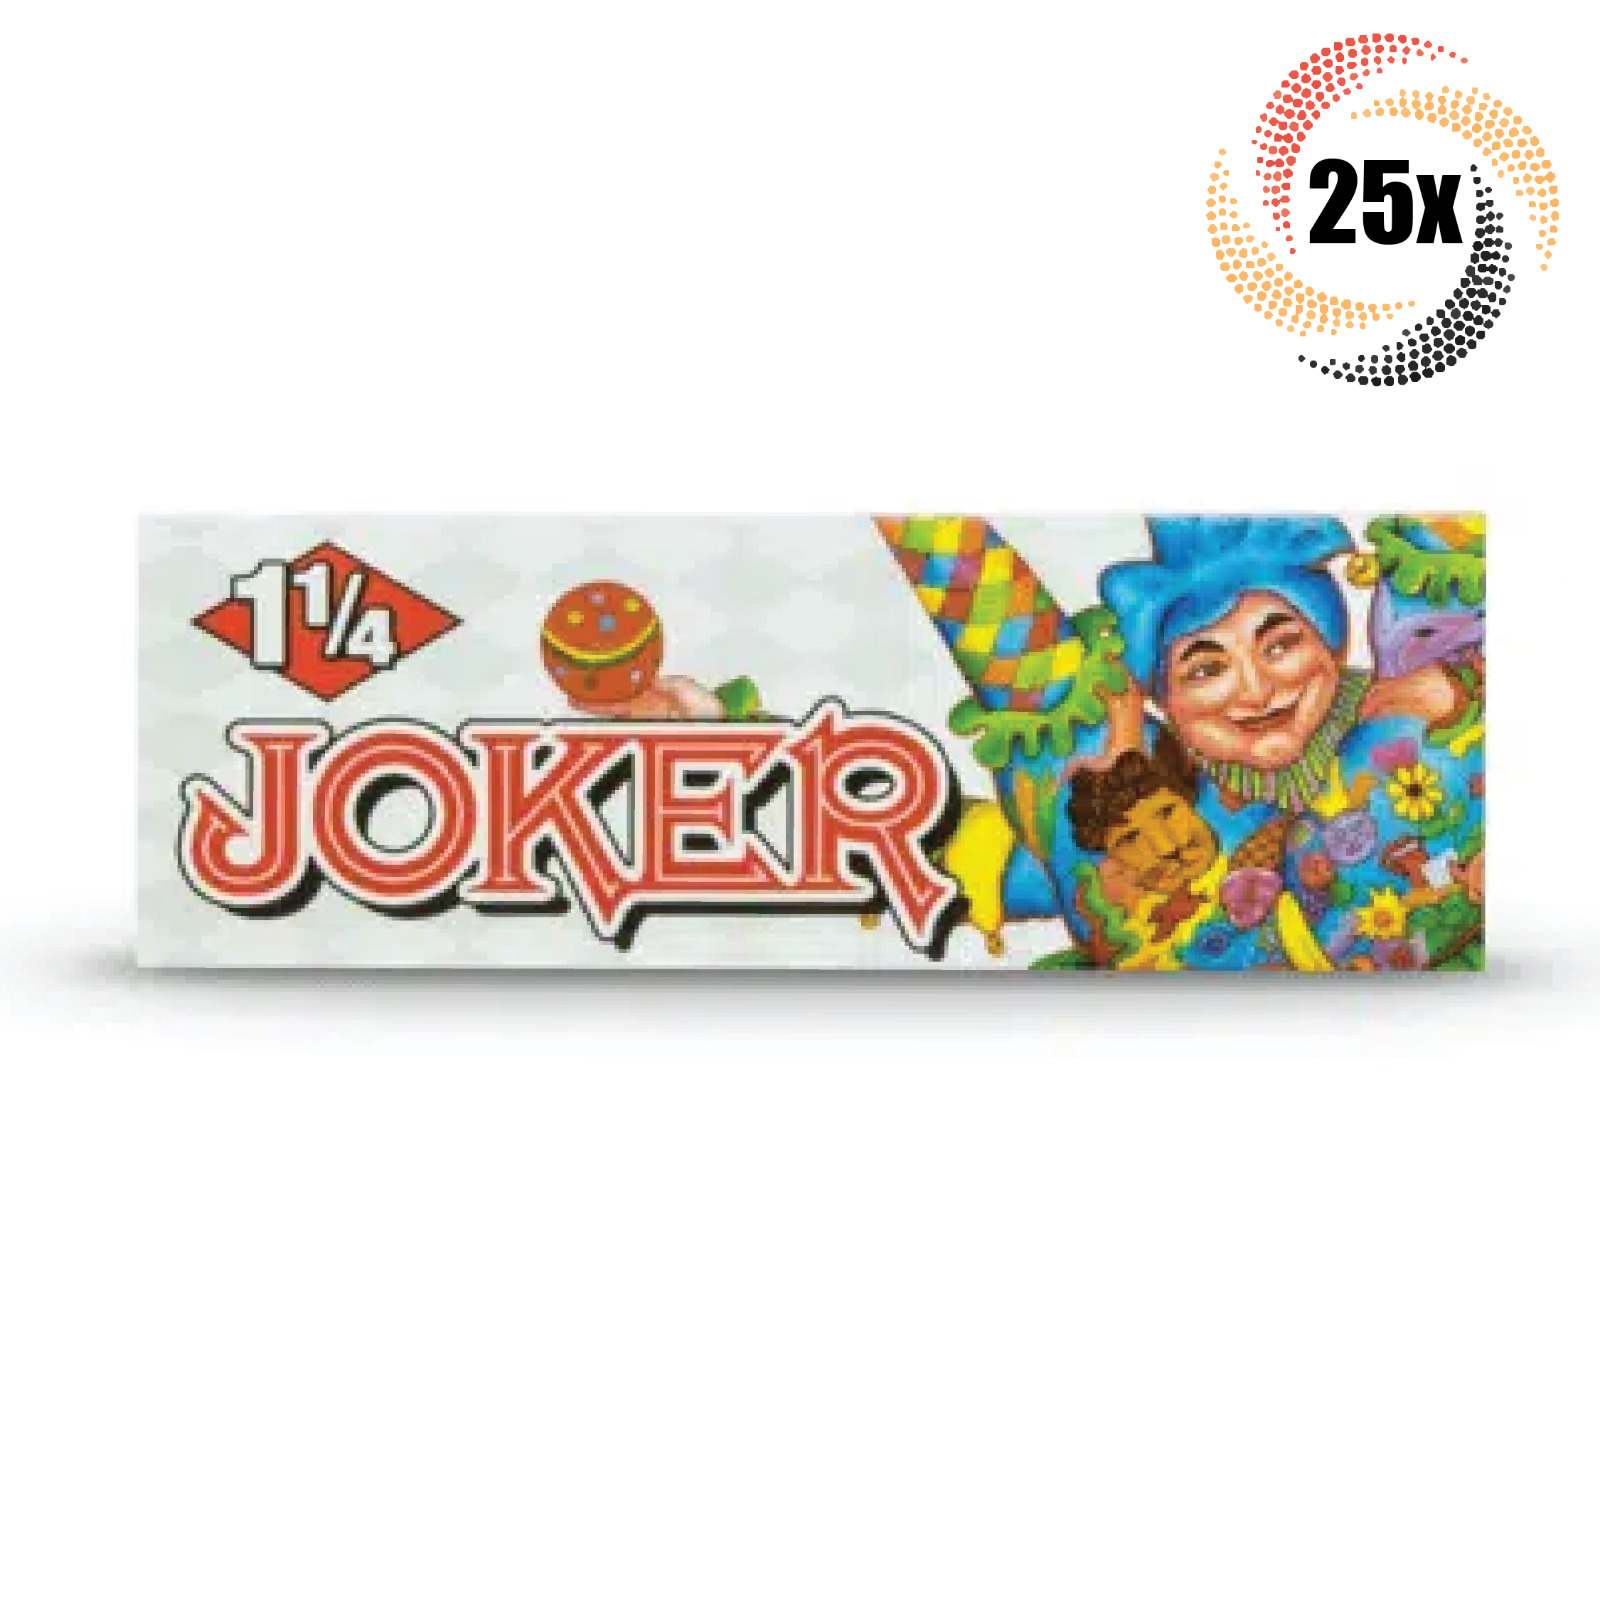 25x Packs Joker Rolling Papers 1 1/4 | 24 Papers Each | + 2 Free Rolling Tubes